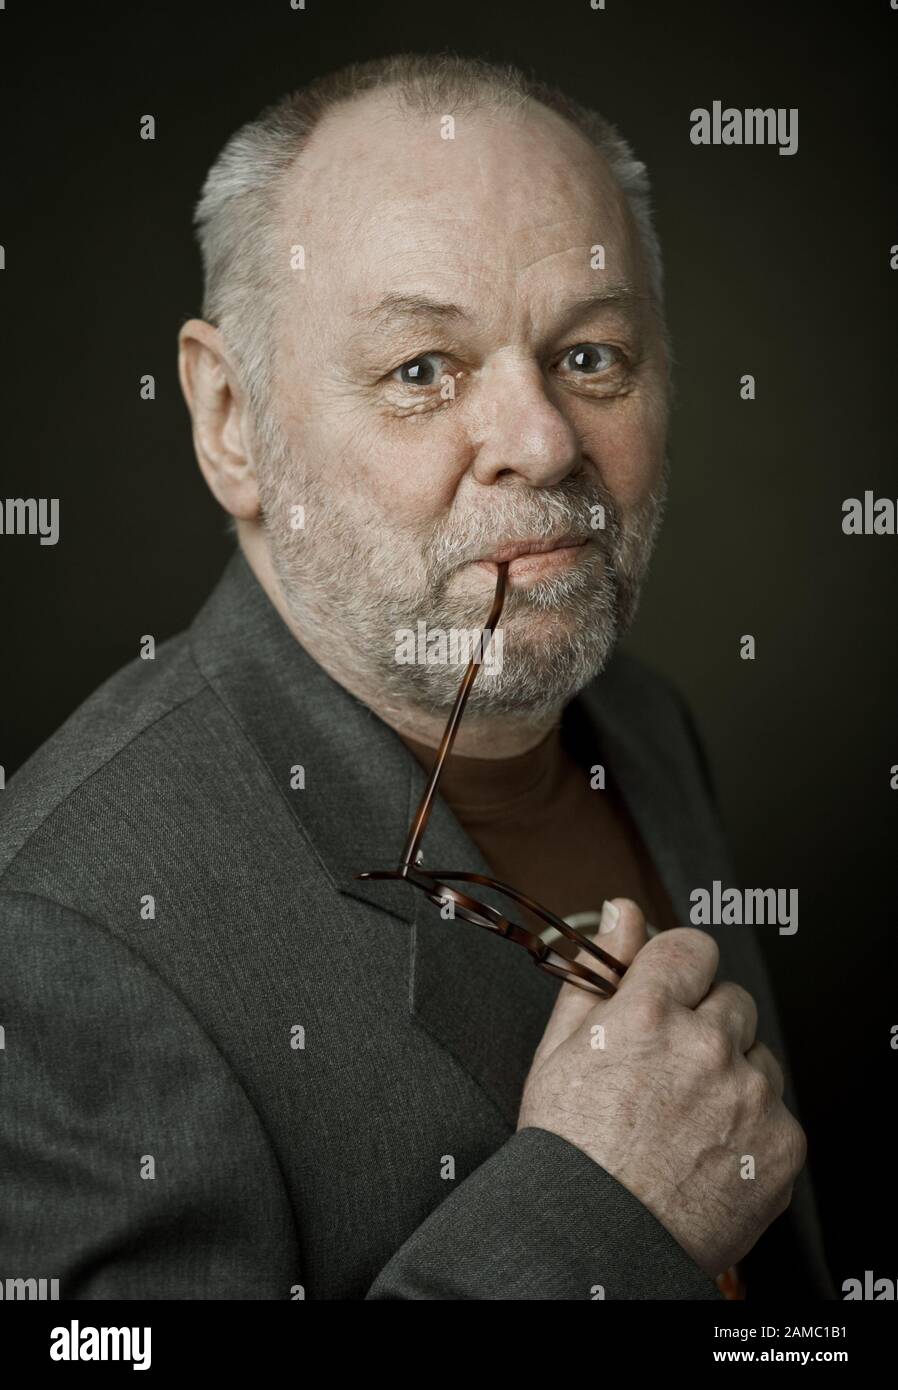 Older man with glasses and beard Stock Photo